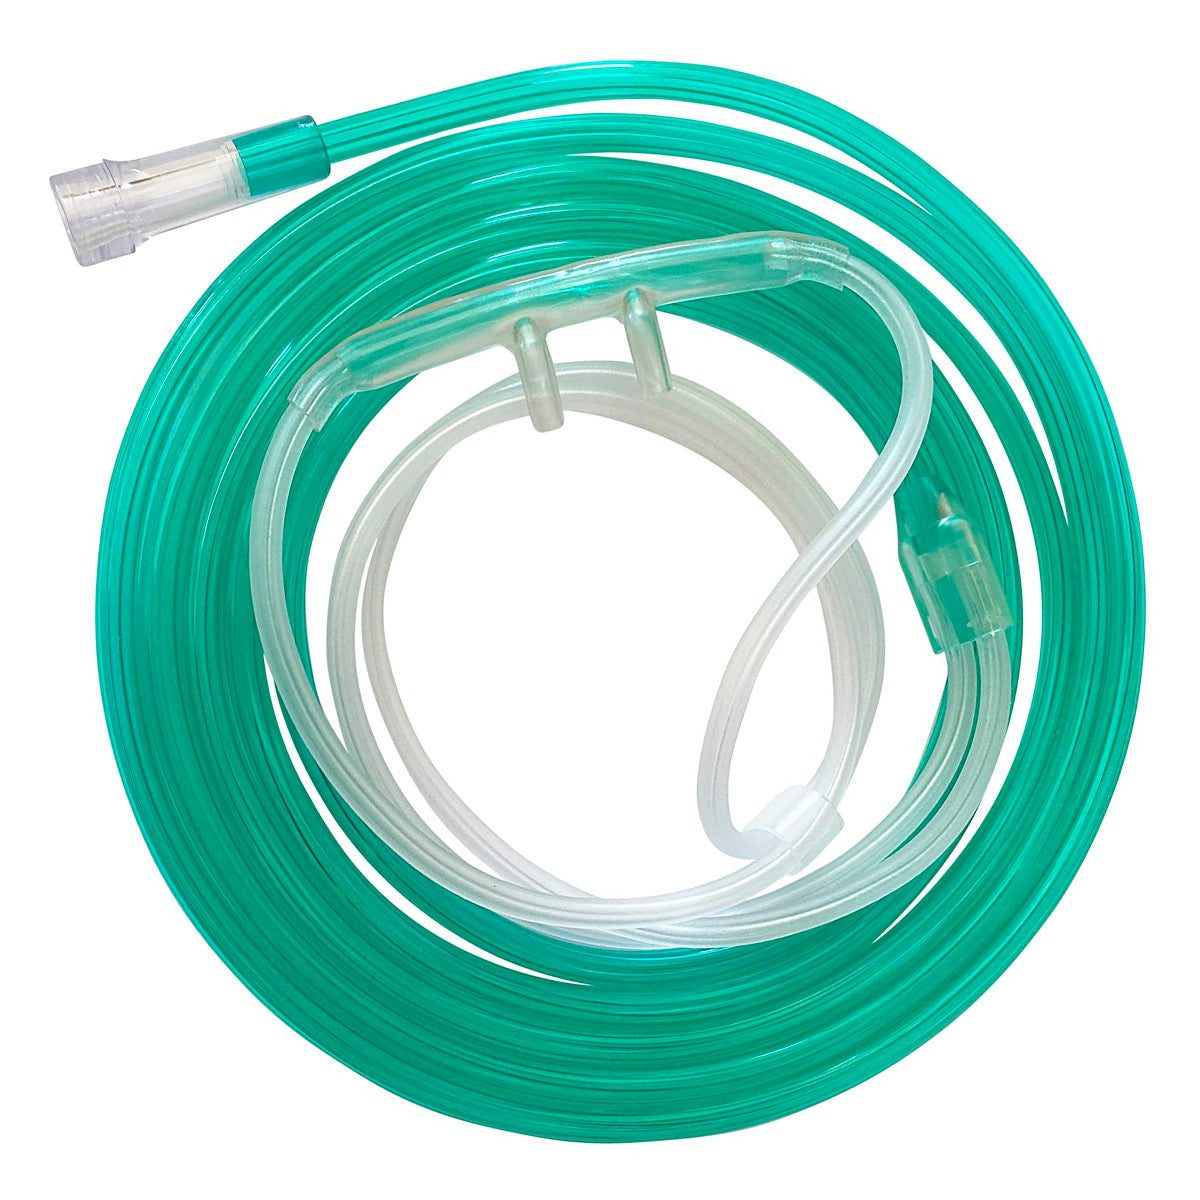 High Flow ComfortSoft Plus Adult Nasal Cannula with 14 Foot Green Tubing - DISCONTINUED